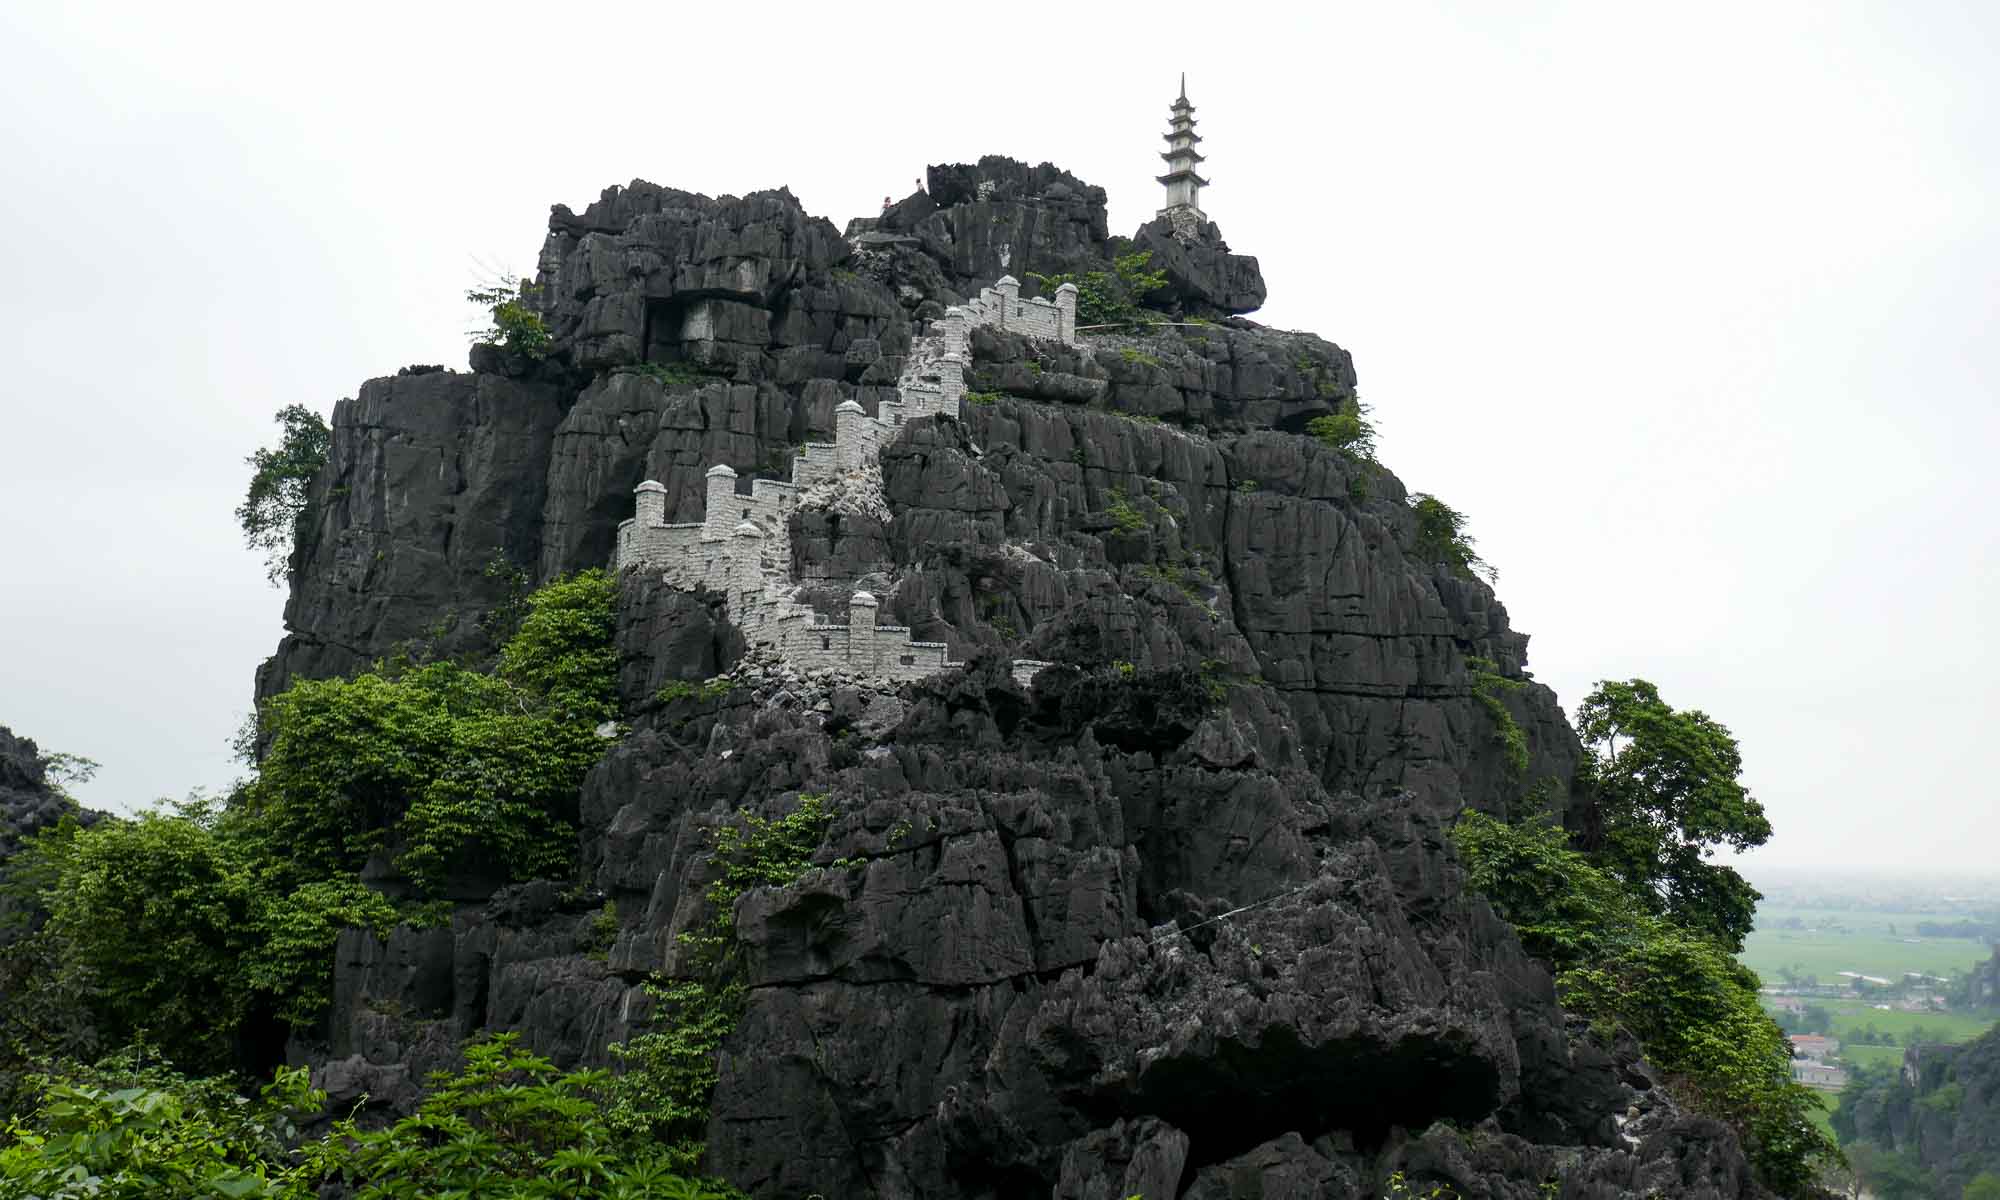 This peak is a lower part of Hang Mua which can also be climbed